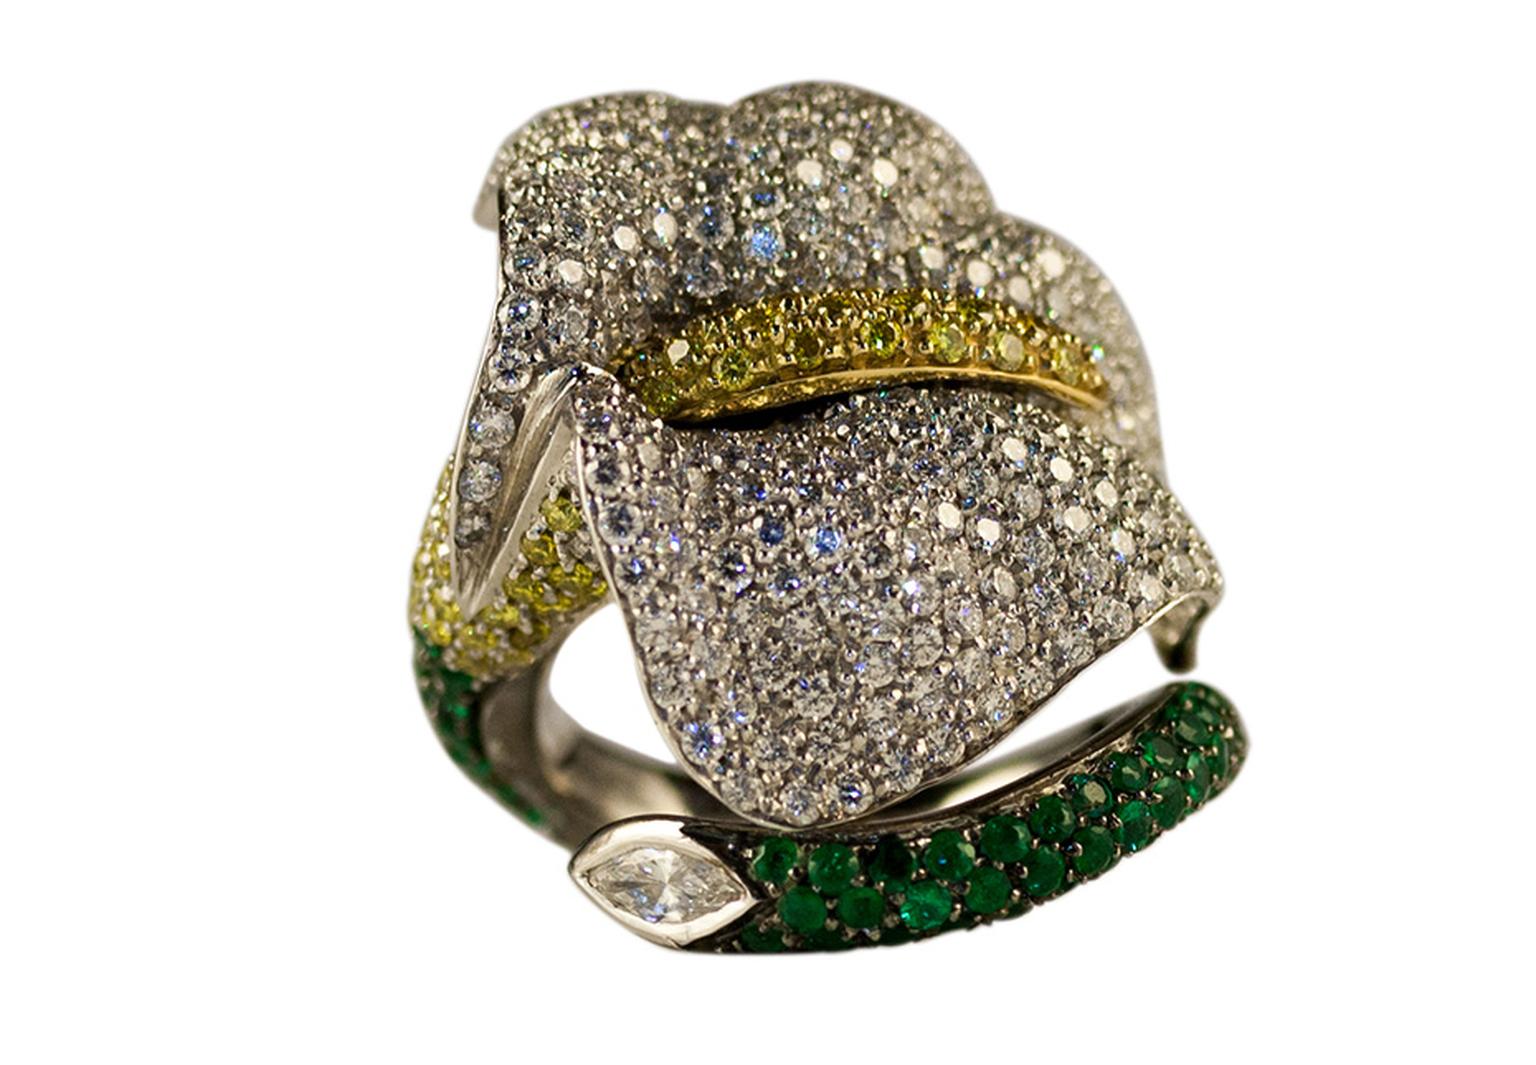 Emily H London's Calla Lily ring in white gold, pavé set with emeralds and white and yellow diamonds